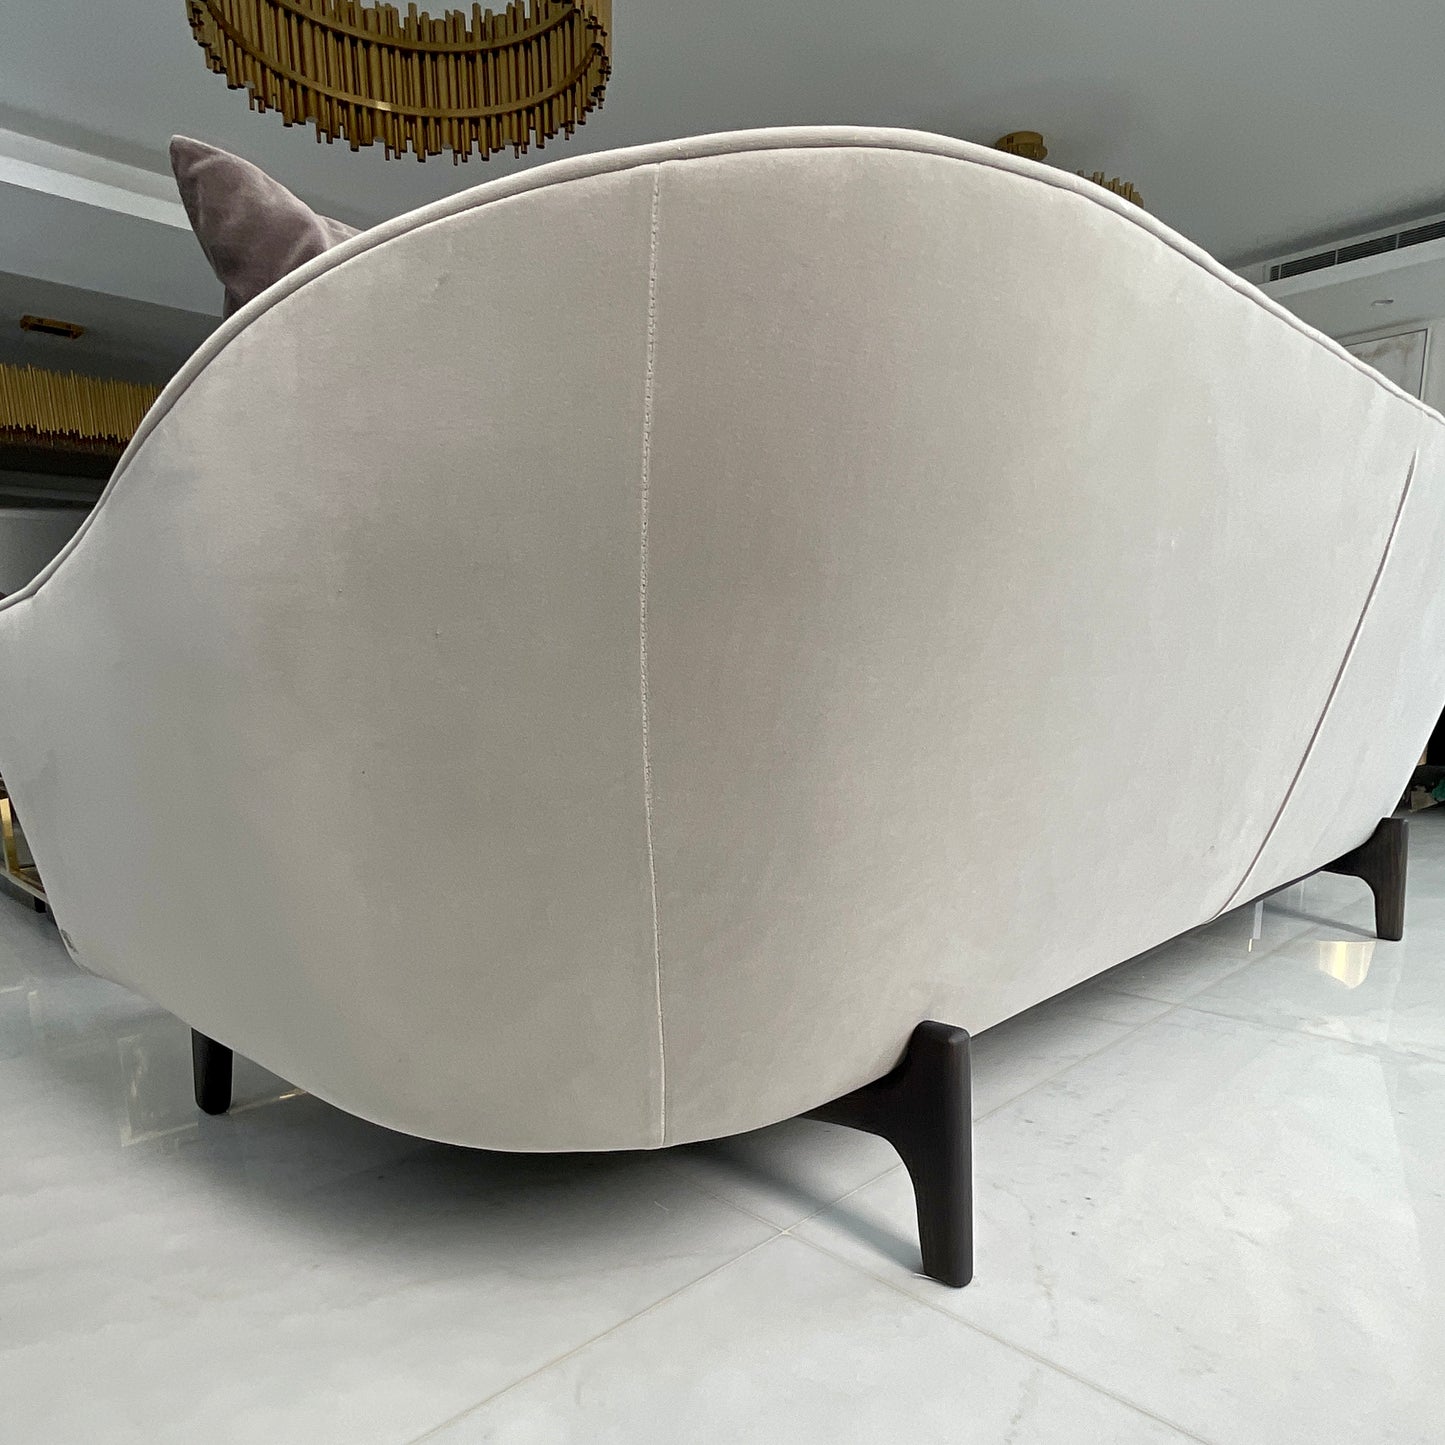 Amouage Sofa by Castello Lagravinese for Busnelli (2 available)